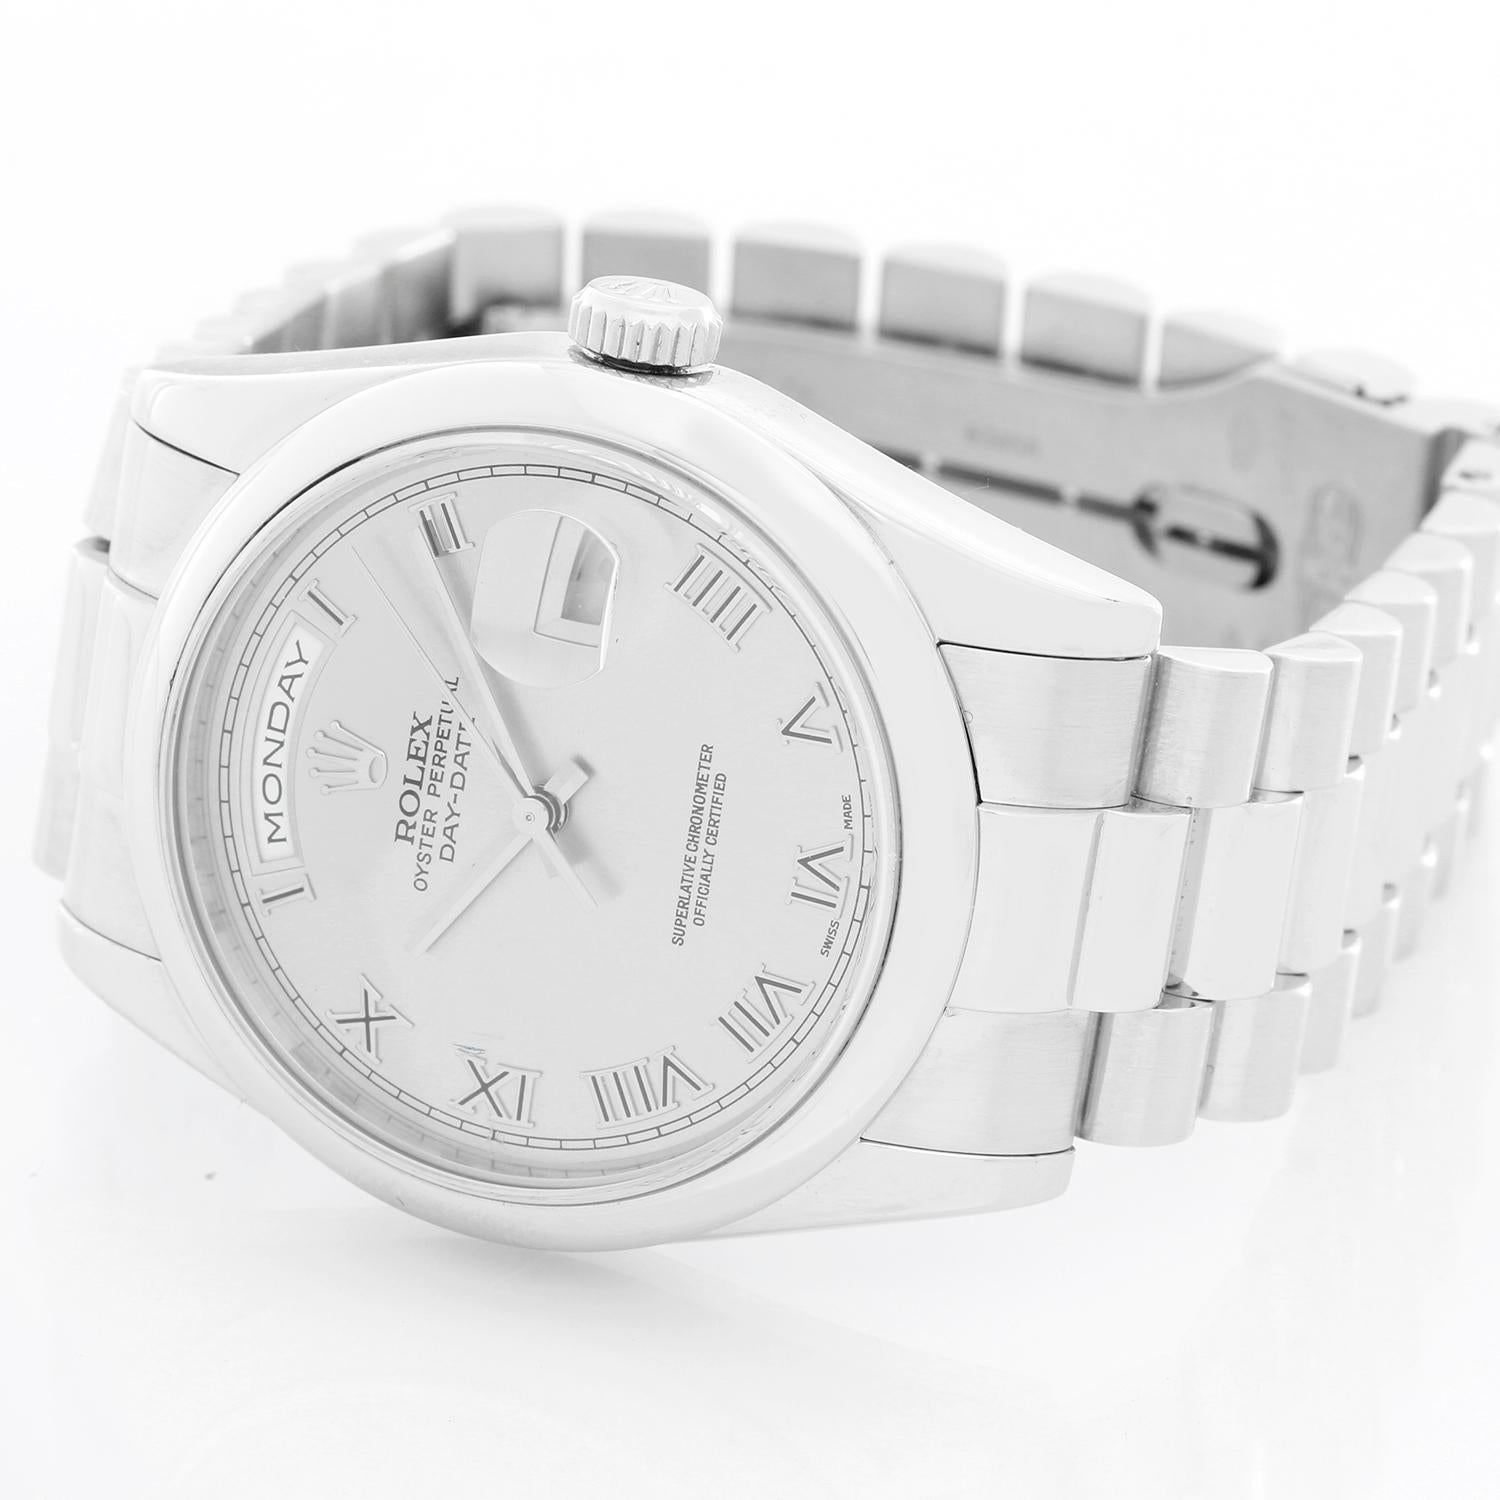 Rolex Platinum President  Day-Date Men's Watch 118206 - Automatic winding, 31 jewels, Quickset, sapphire crystal. Platinum case with smooth bezel . Rhodium Roman dial . Platinum hidden clasp President bracelet. Pre-owned with box and books.